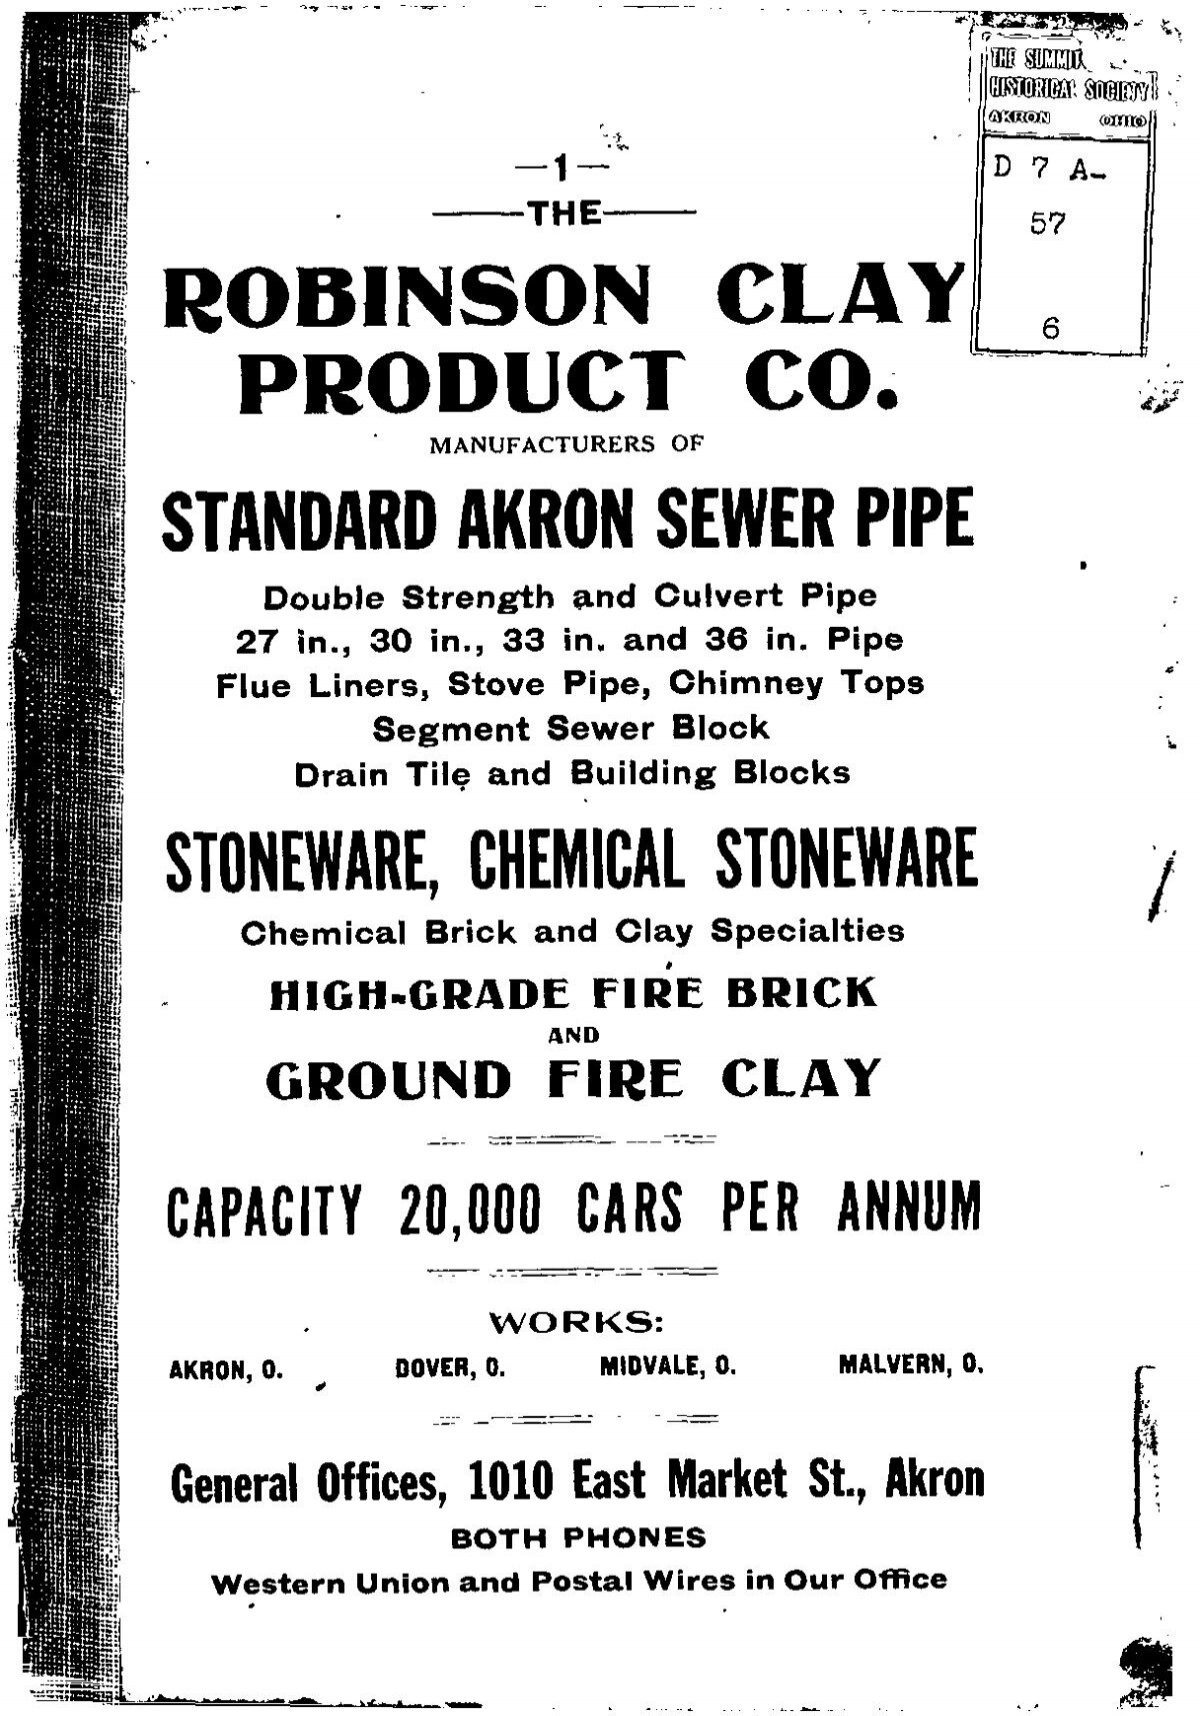 Public Library clay - Akron-Summit robinson product co. County